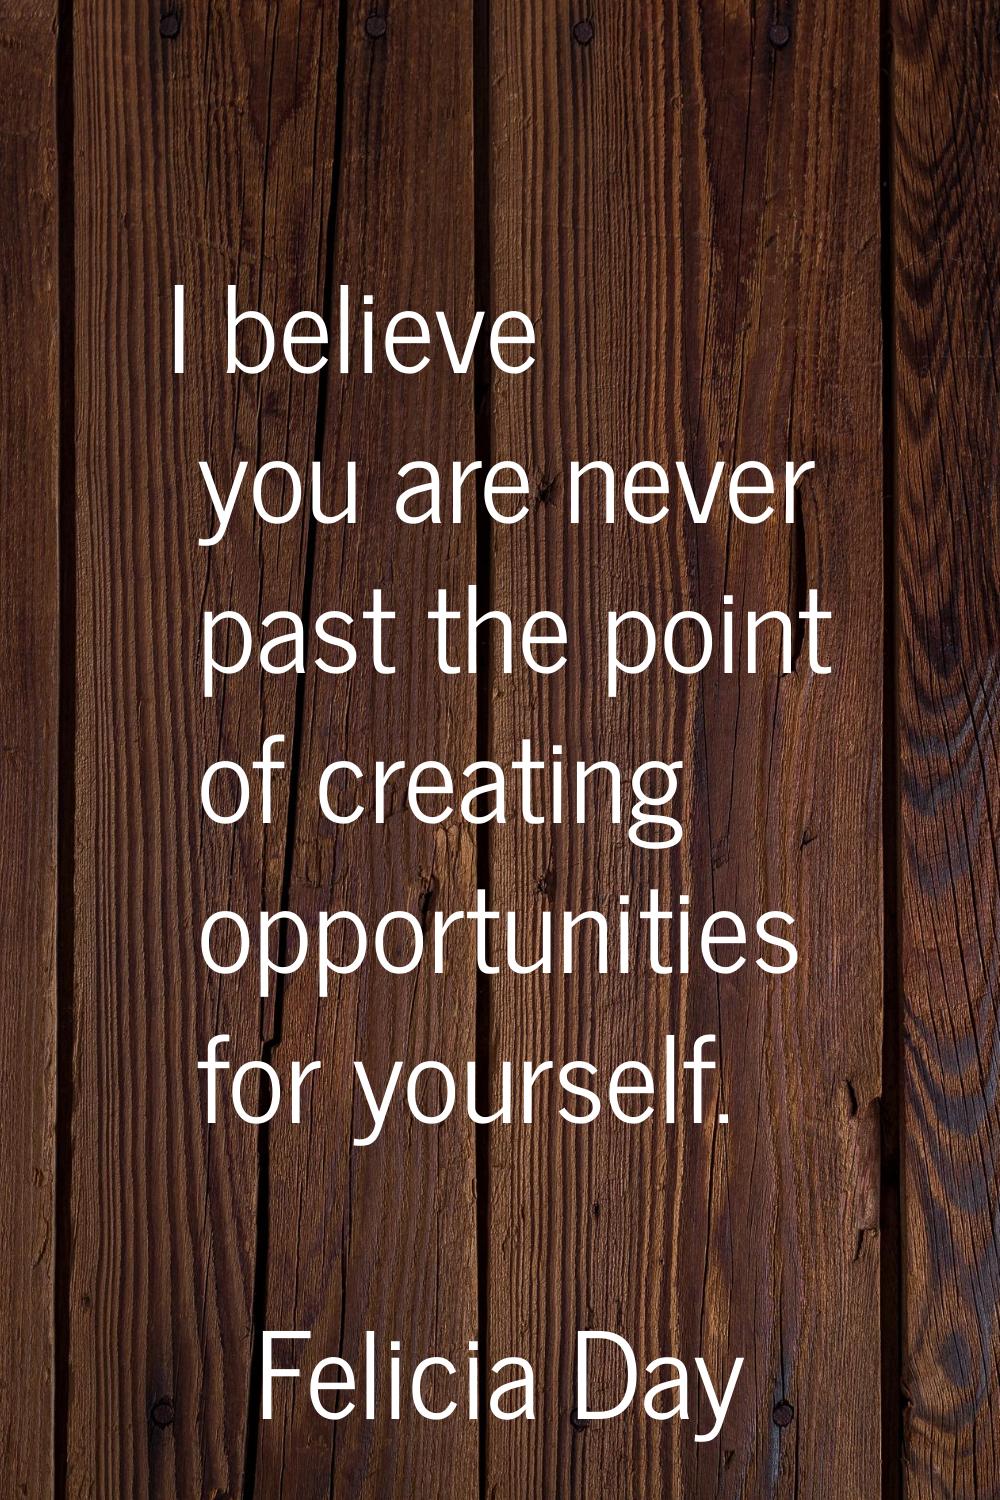 I believe you are never past the point of creating opportunities for yourself.